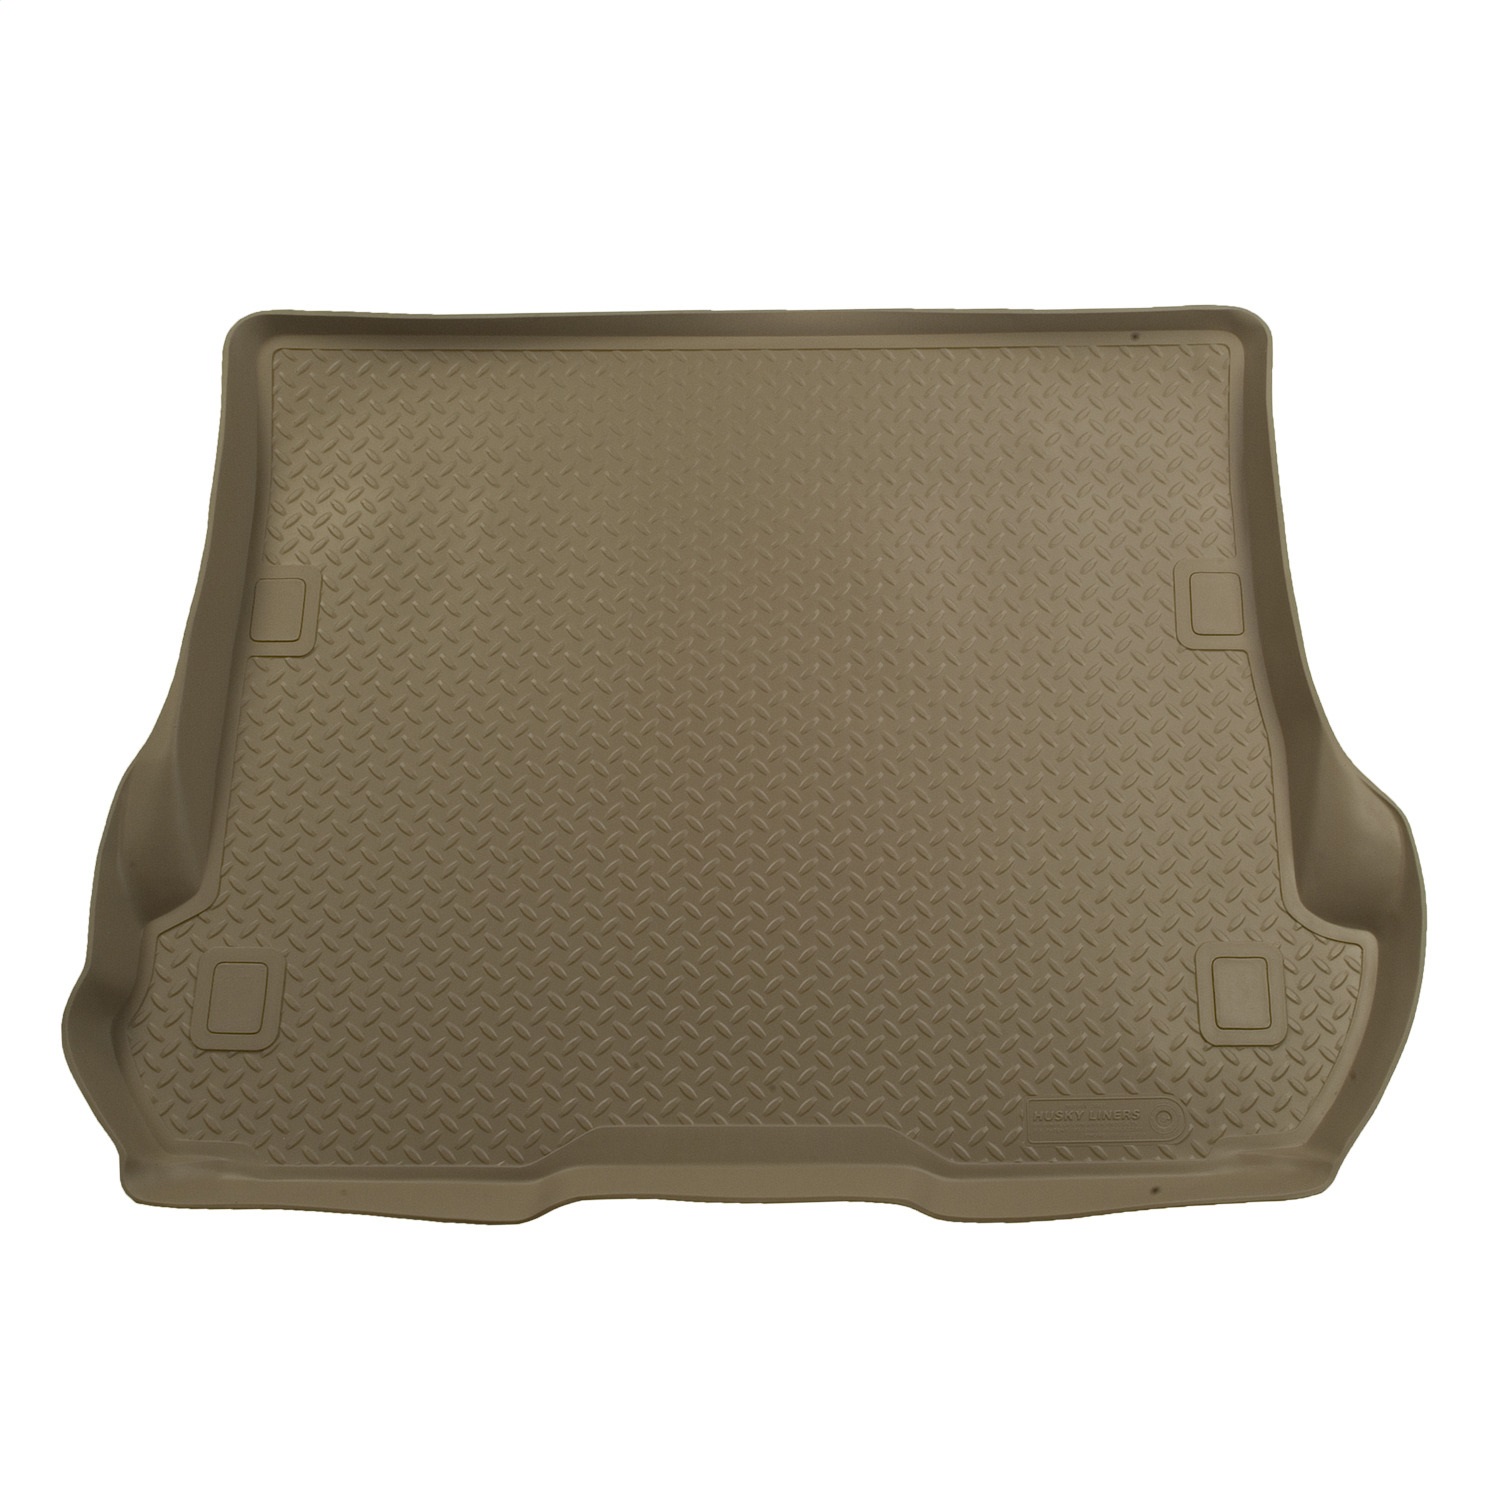 Husky Liners Husky Liners 25103 Classic Style; Cargo Liner Fits 96-02 4Runner